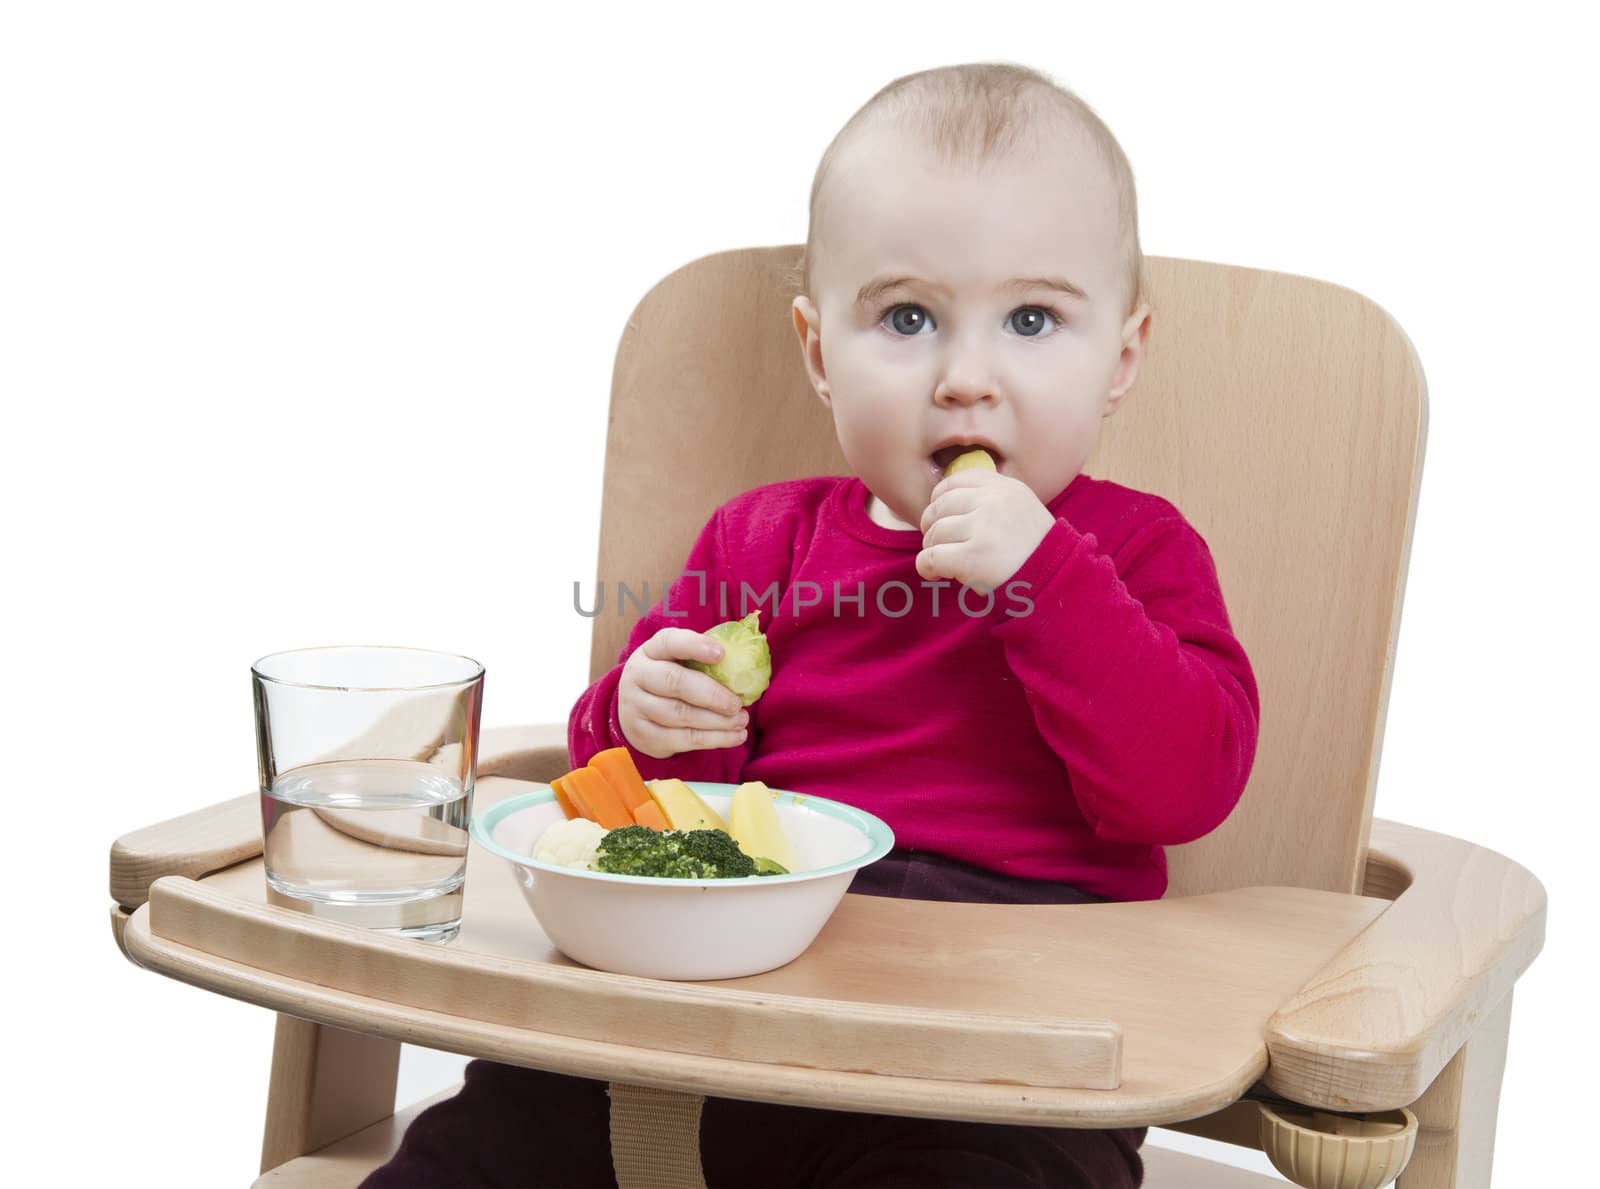 young child eating in high chair by gewoldi